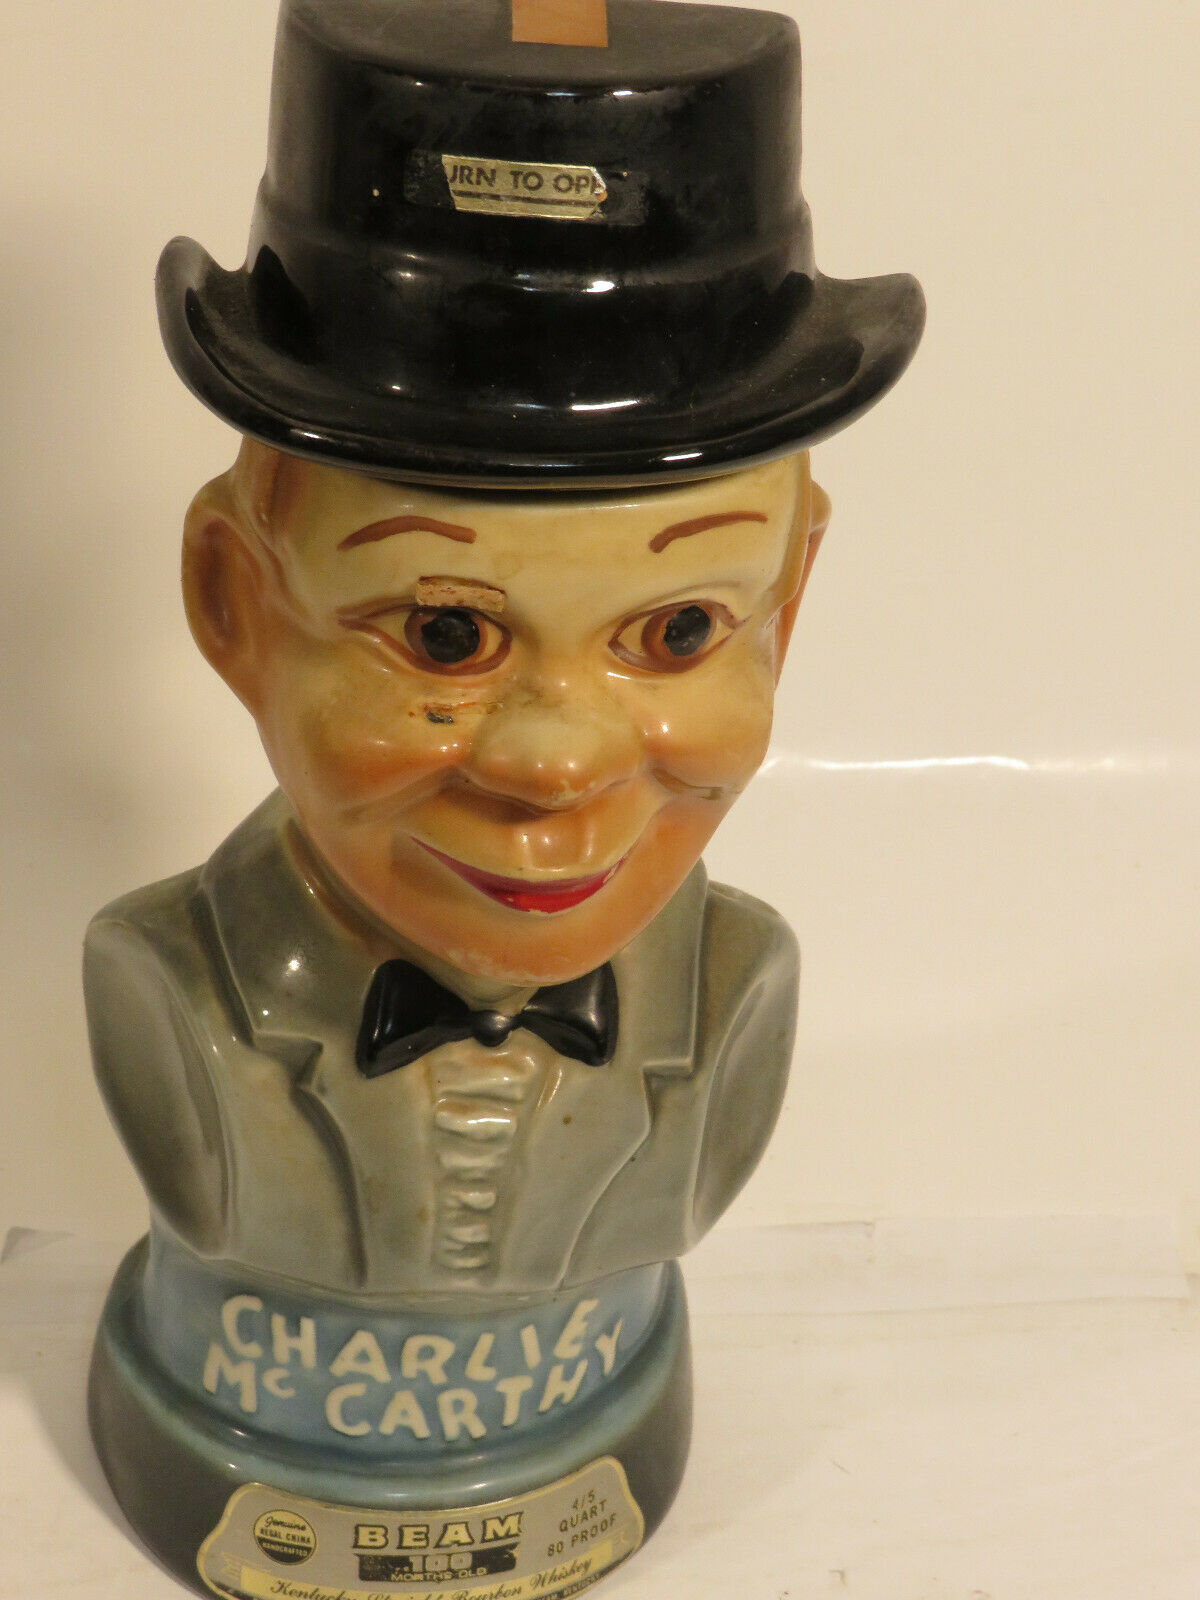 1976 Jim Beam Charlie Mccarthy Decanter Vintage Whiskey Bottle Rare Collectible